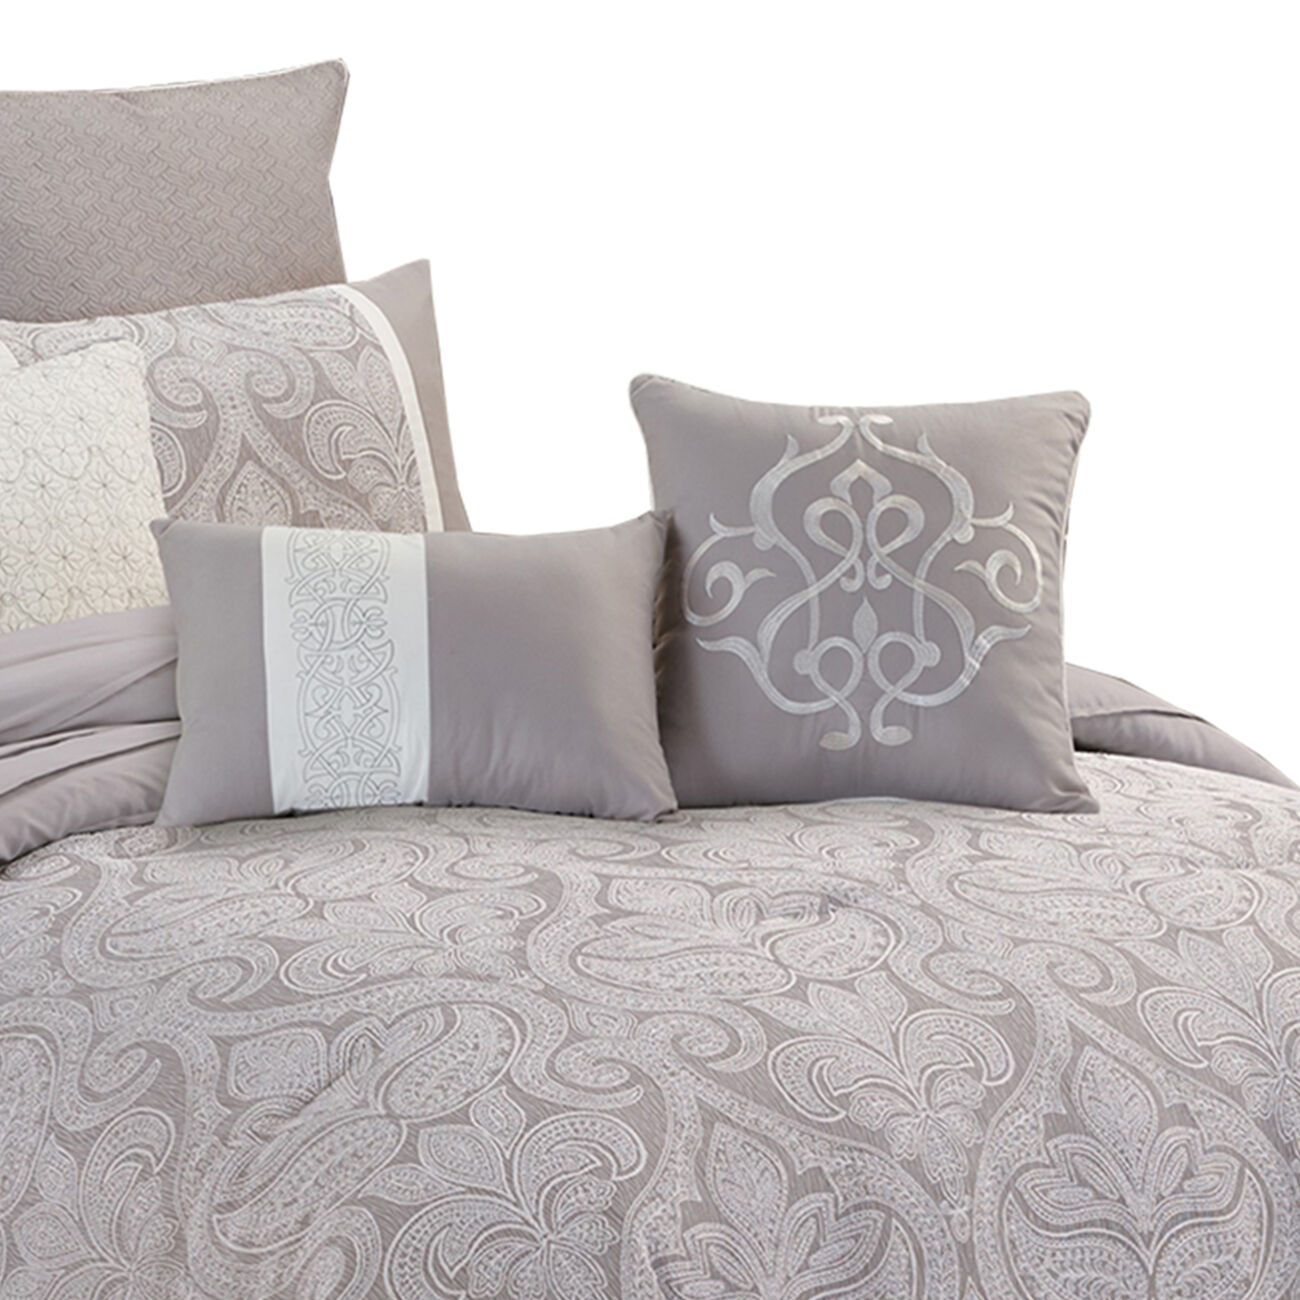 Queen Size 9 Piece Fabric Comforter Set with Medallion Prints, White